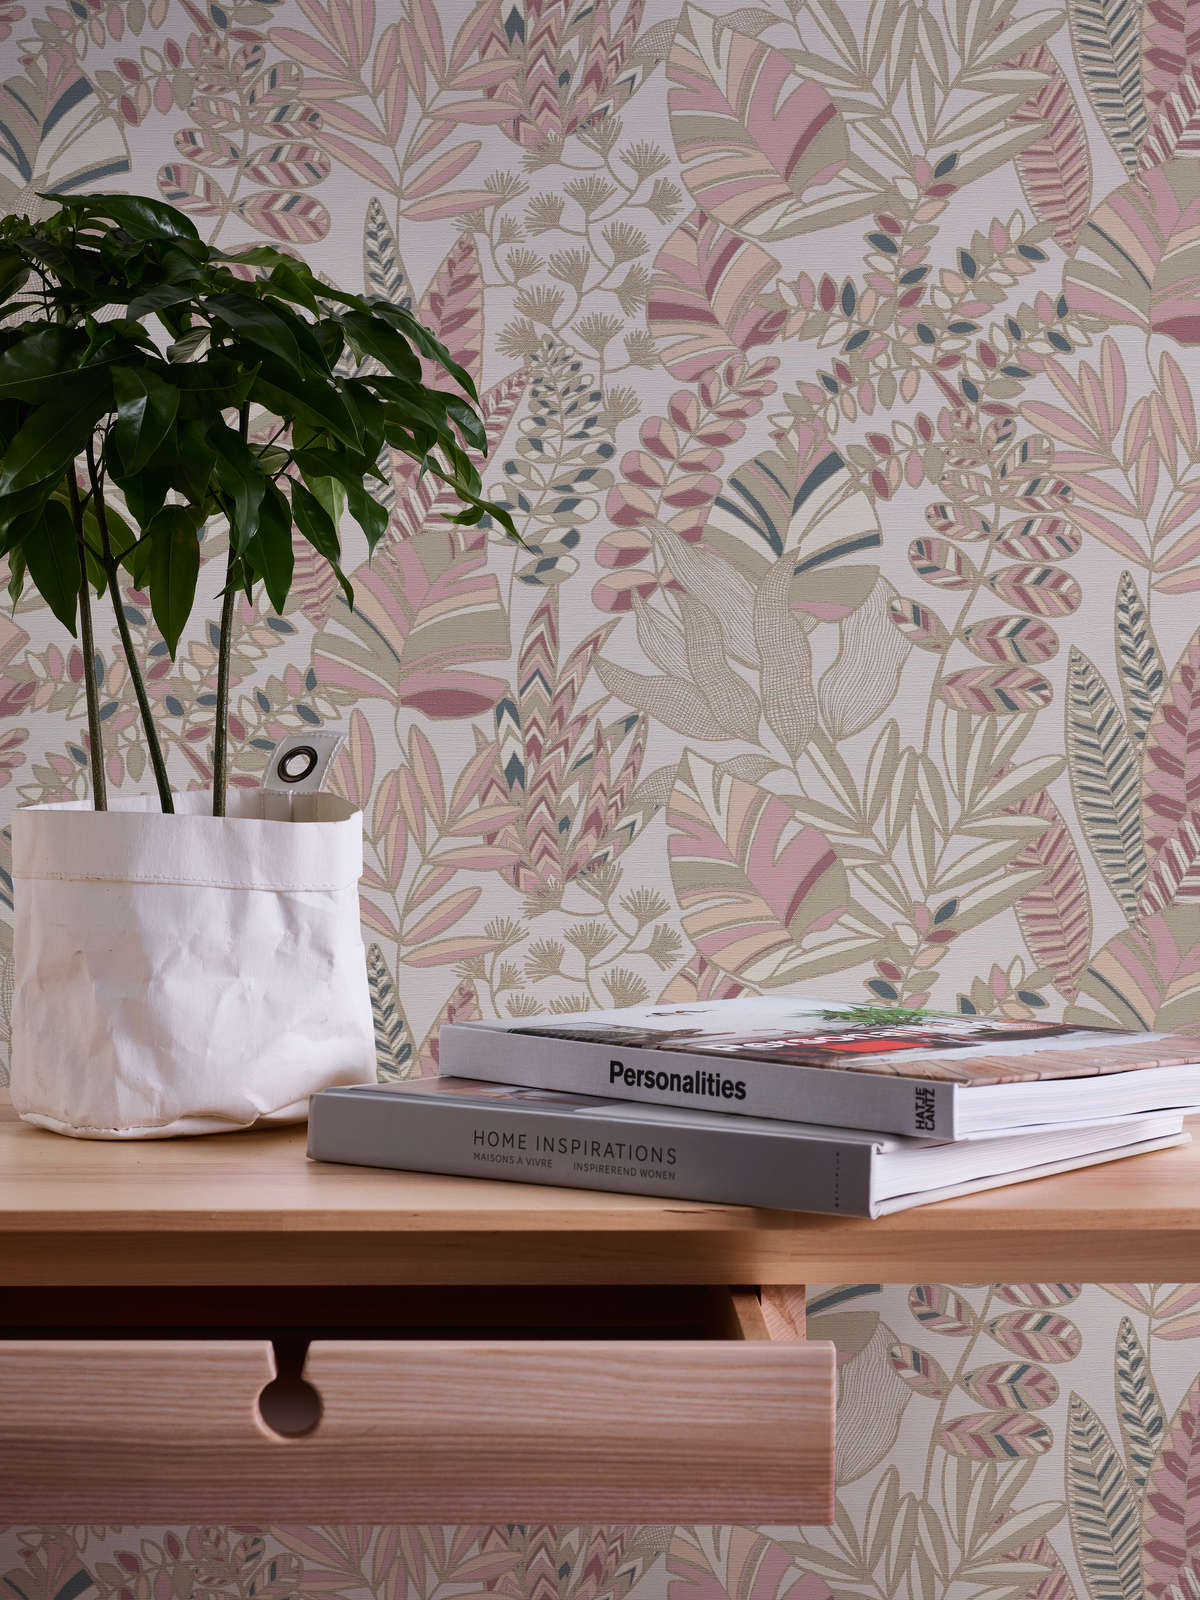             Non-woven wallpaper with large leaves in a light sheen - pink, white, gold
        